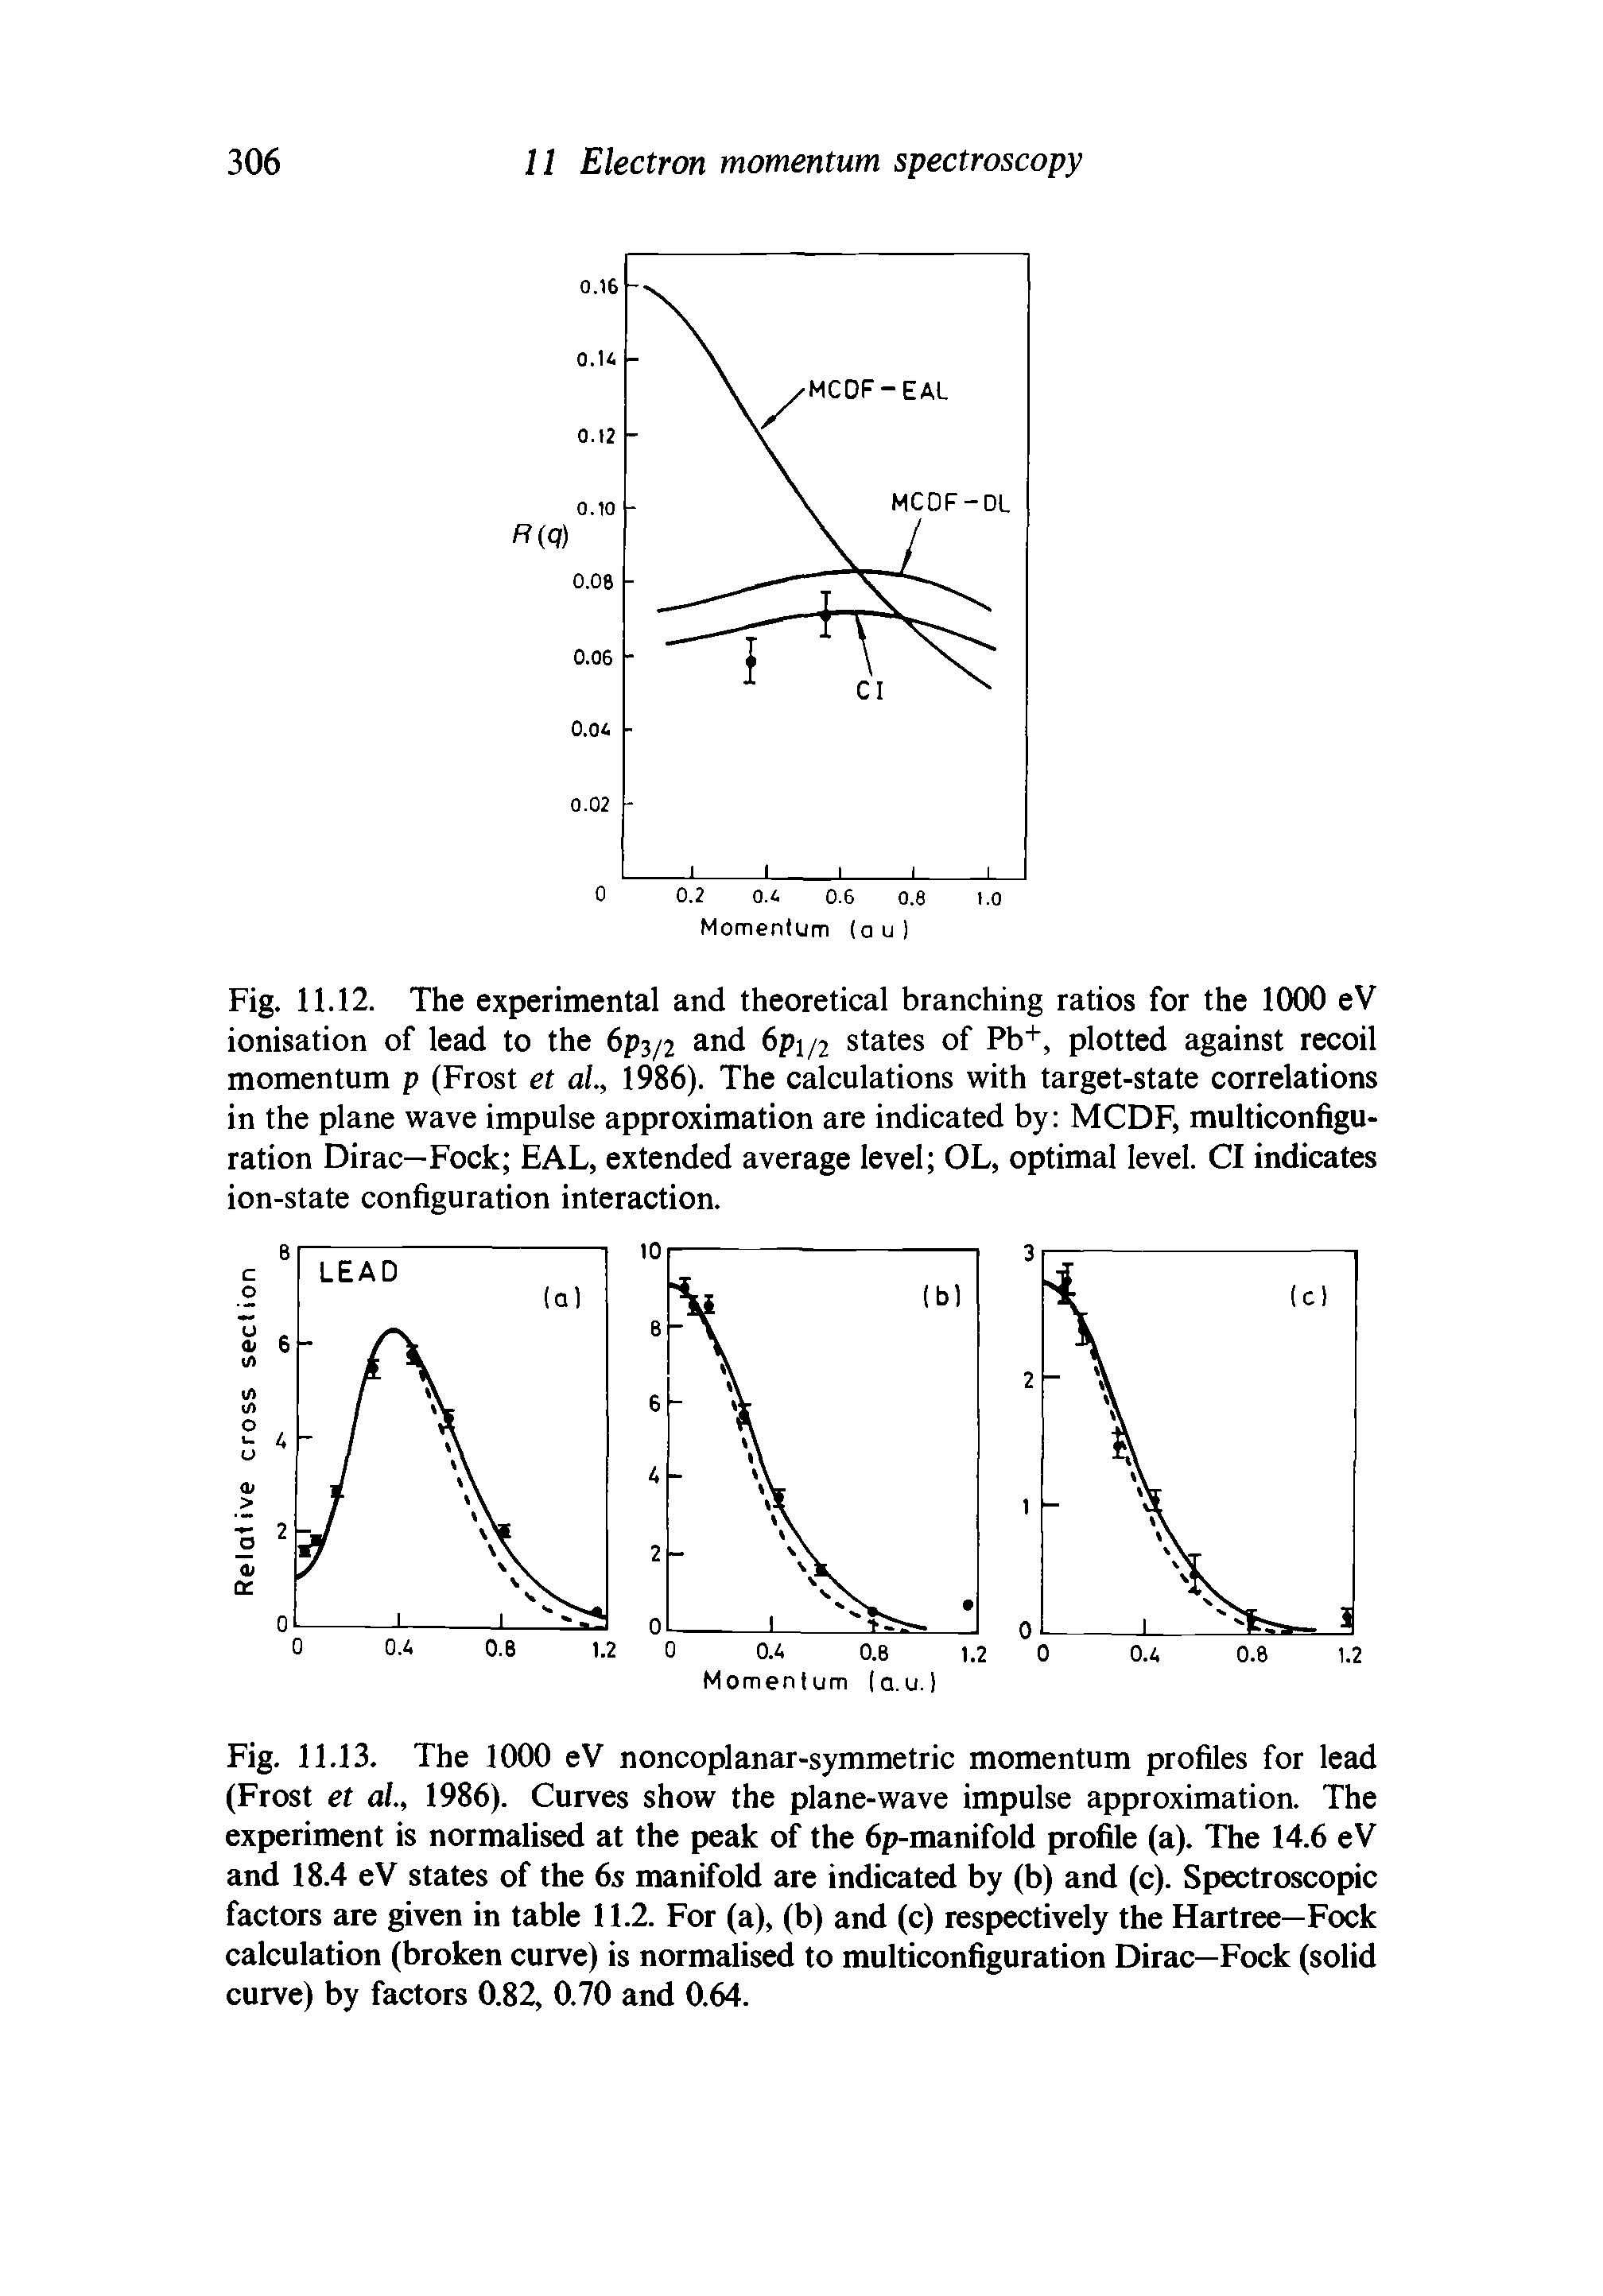 Fig. 11.13. The 1000 eV noncoplanar-symmetric momentum profiles for lead (Frost et al., 1986). Curves show the plane-wave impulse approximation. The experiment is normalised at the peak of the 6p-manifold profile (a). The 14.6 eV and 18.4 eV states of the 6s manifold are indicated by (b) and (c). Spectroscopic factors are given in table 11.2. For (a), (b) and (c) respectively the Hartree—Fock calculation (broken curve) is normalised to multiconfiguration Dirac—Fock (solid curve) by factors 0.82, 0.70 and 0.64.